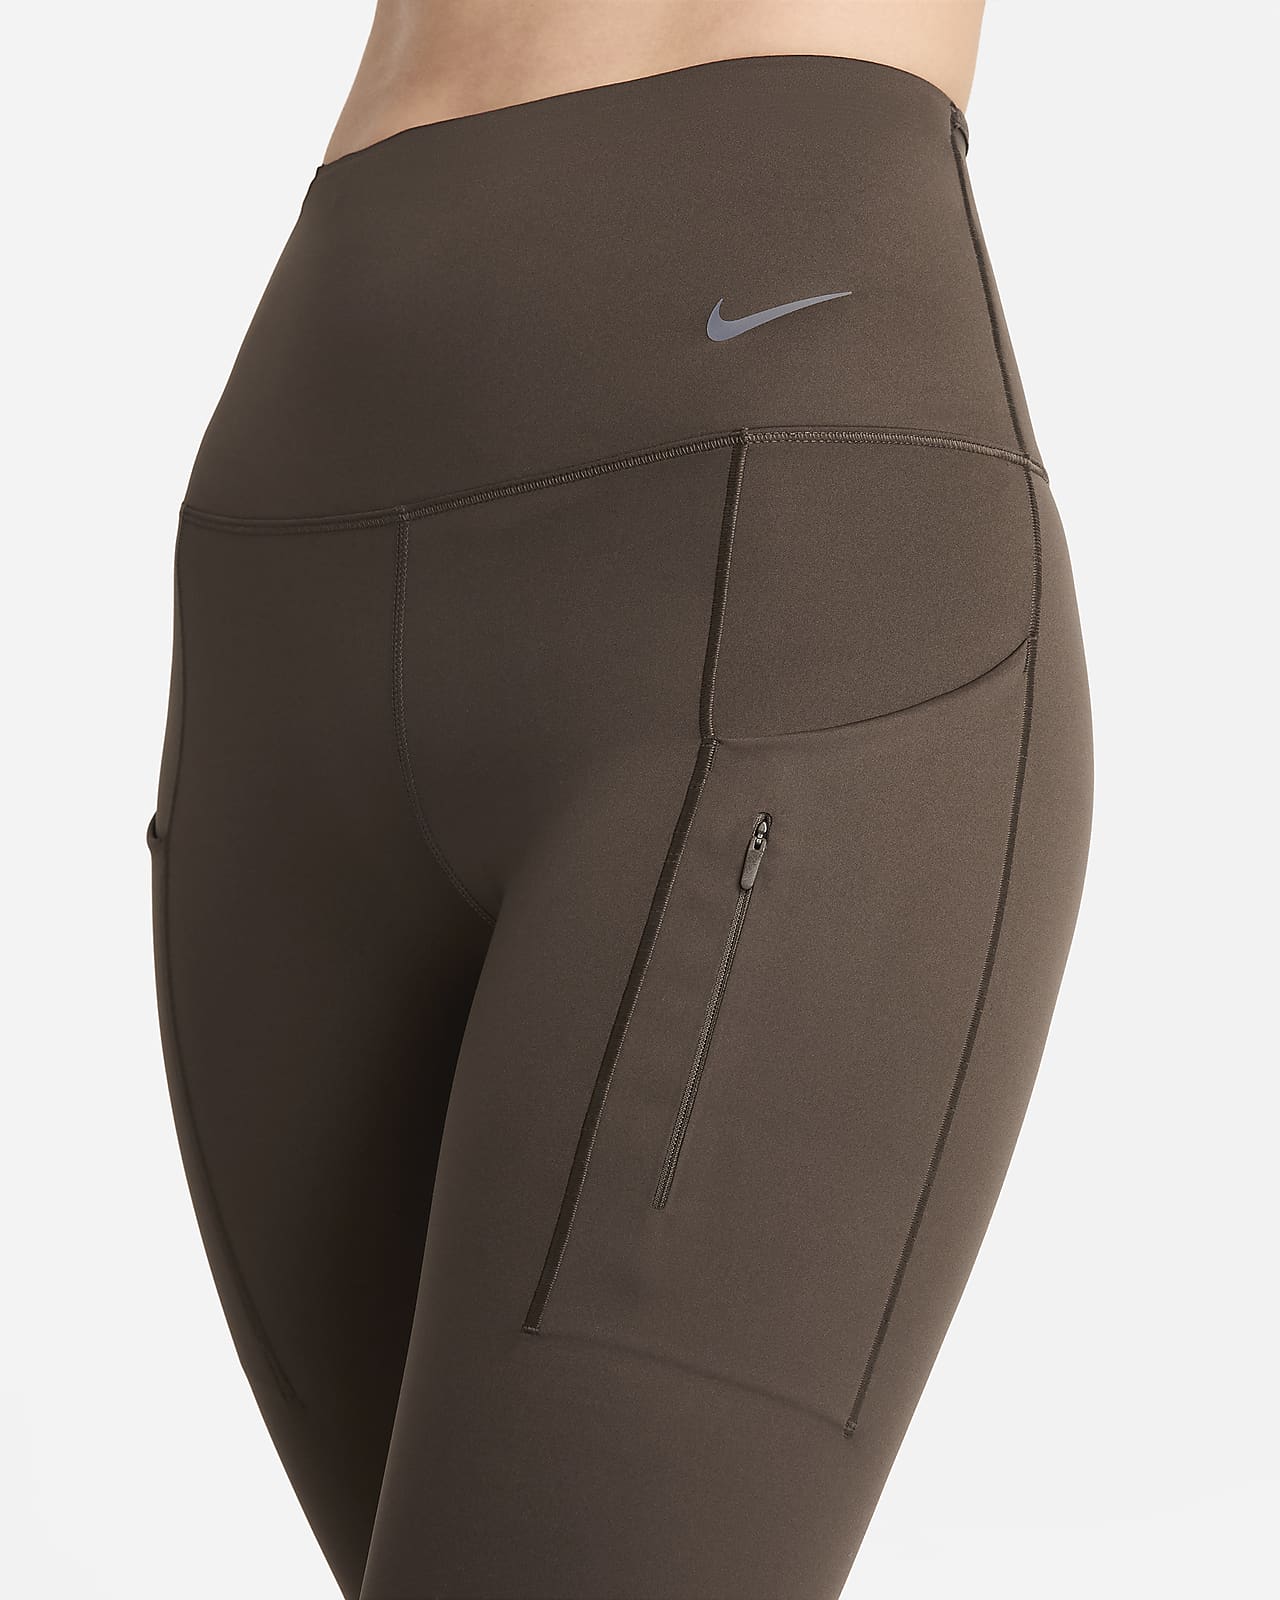 Golf Firm Support Tights & Leggings. Nike ID